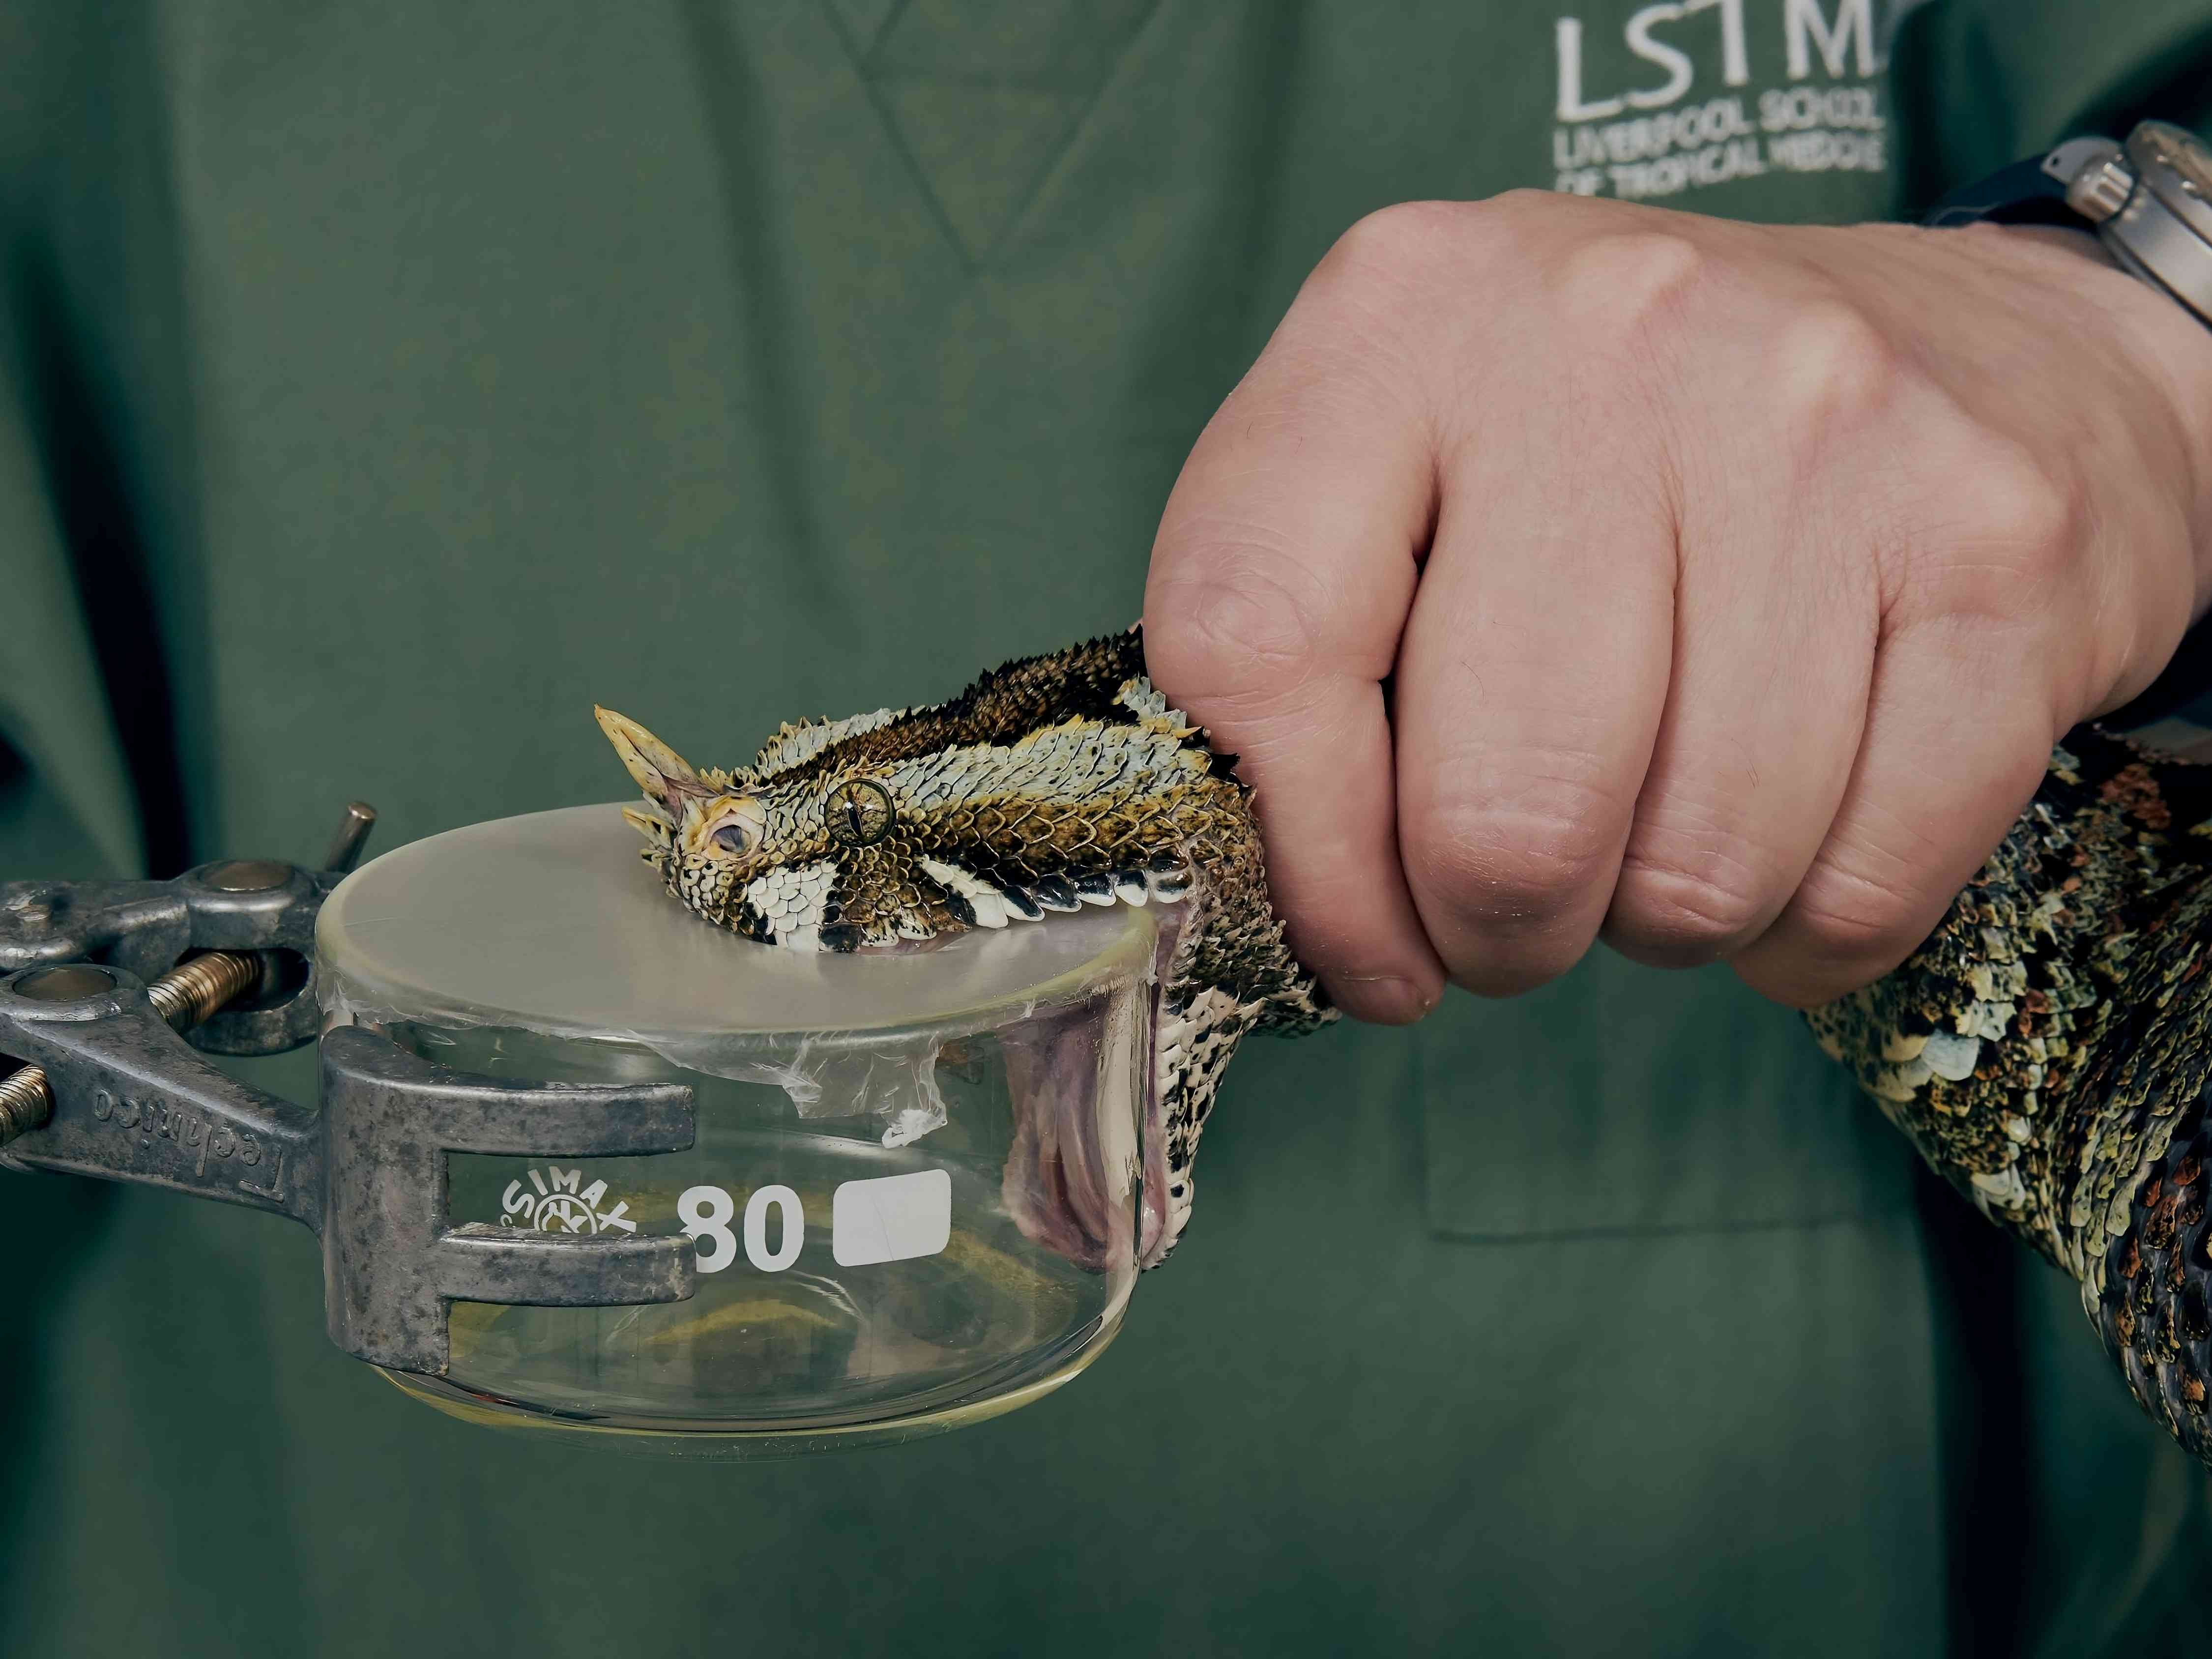 Scientists at the Liverpool School of Tropical Medicine's Centre of Snakebite Research and Interventions, extract a snake's venom.